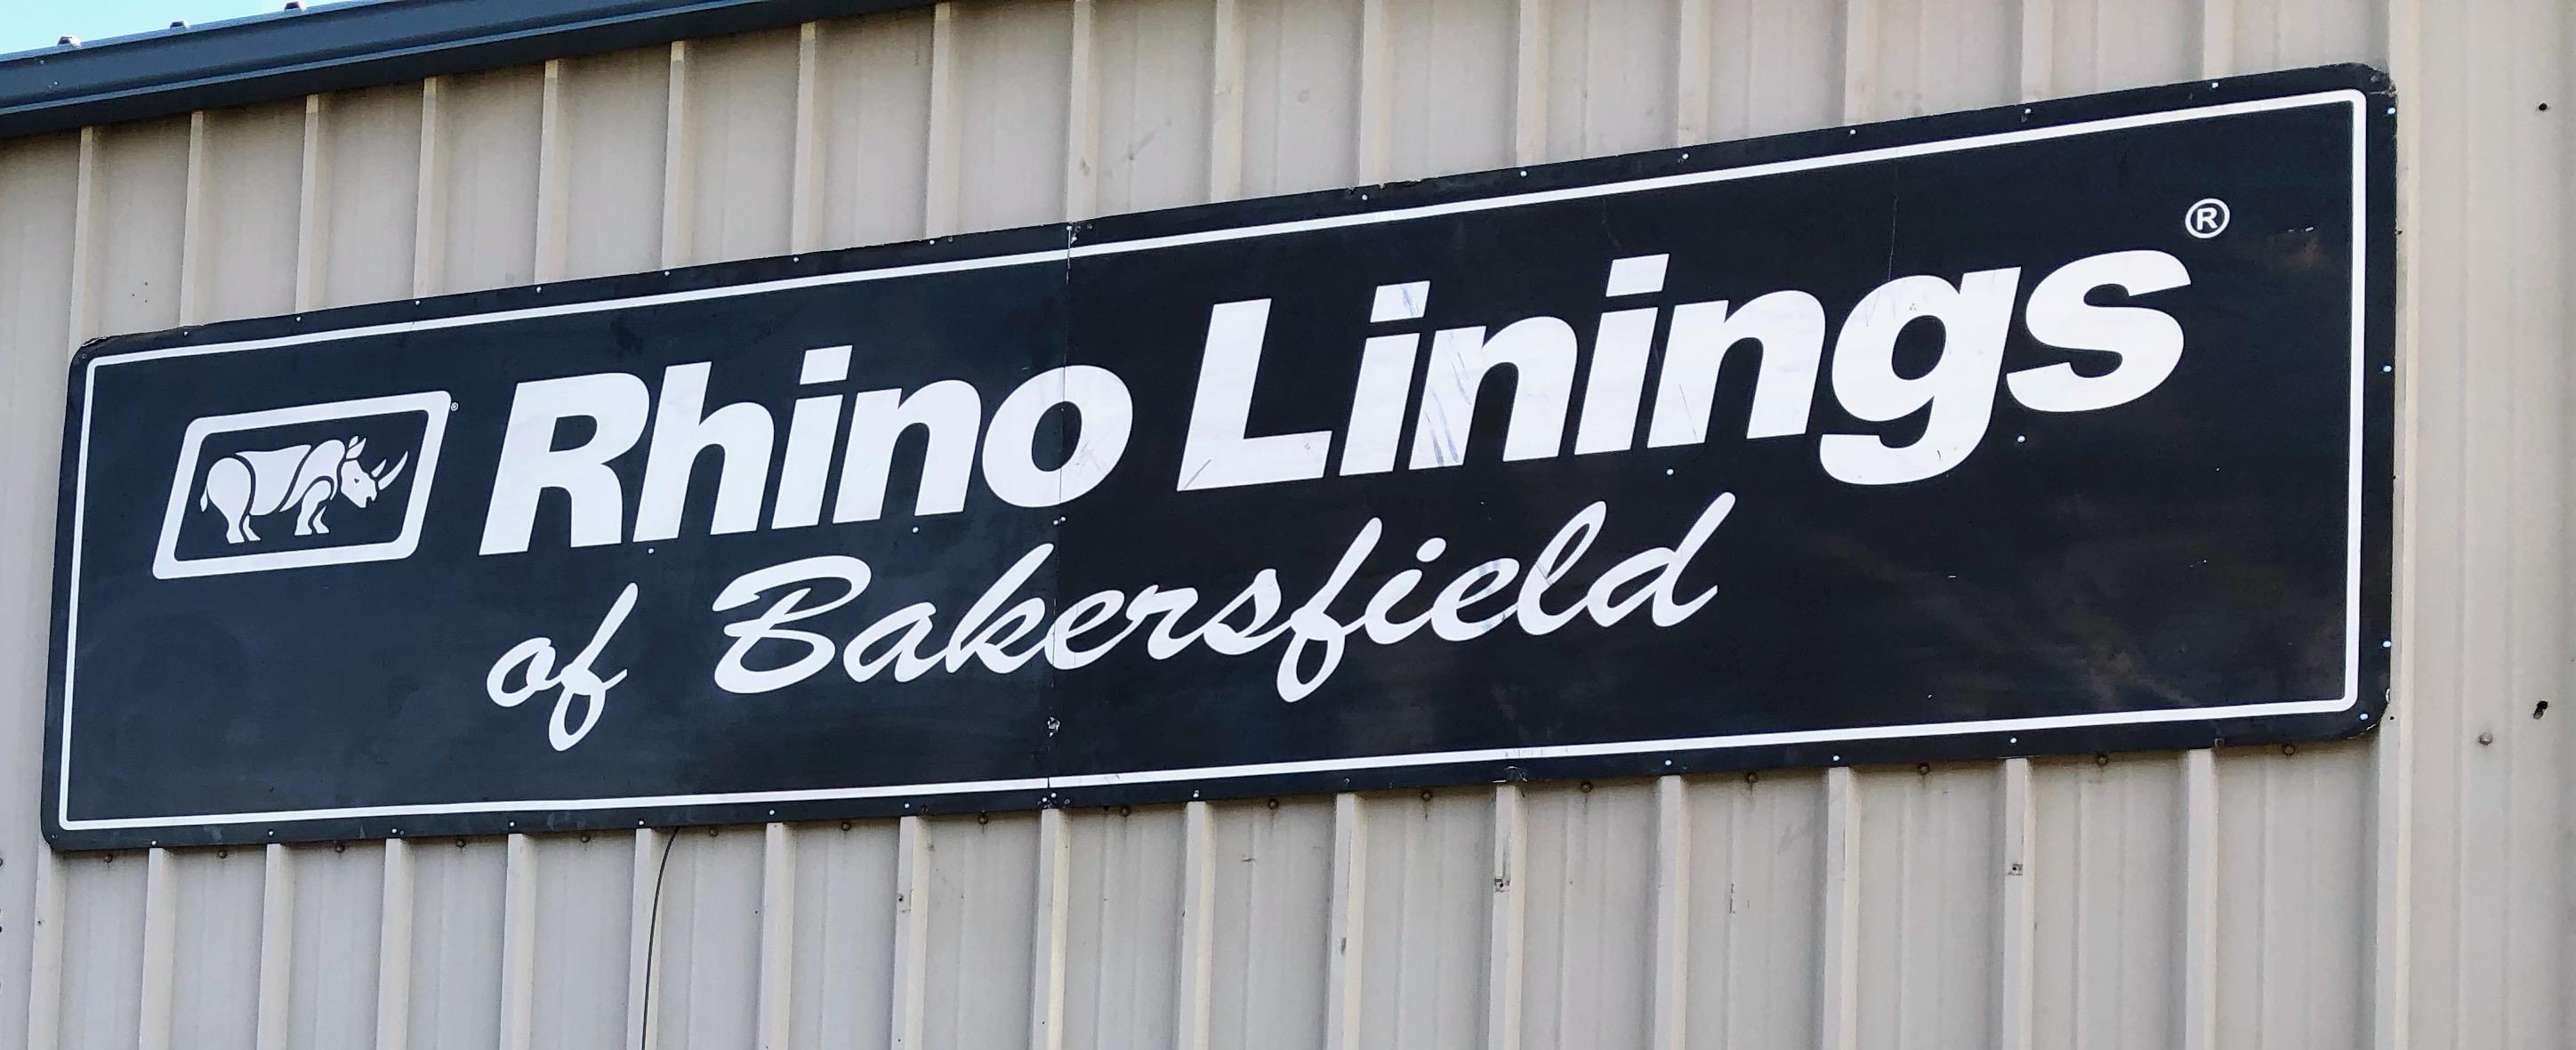 Rhino Linings OF BAKERSFIELD | 4314 Wible Rd, Bakersfield, CA 93313, United States | Phone: (661) 426-4441